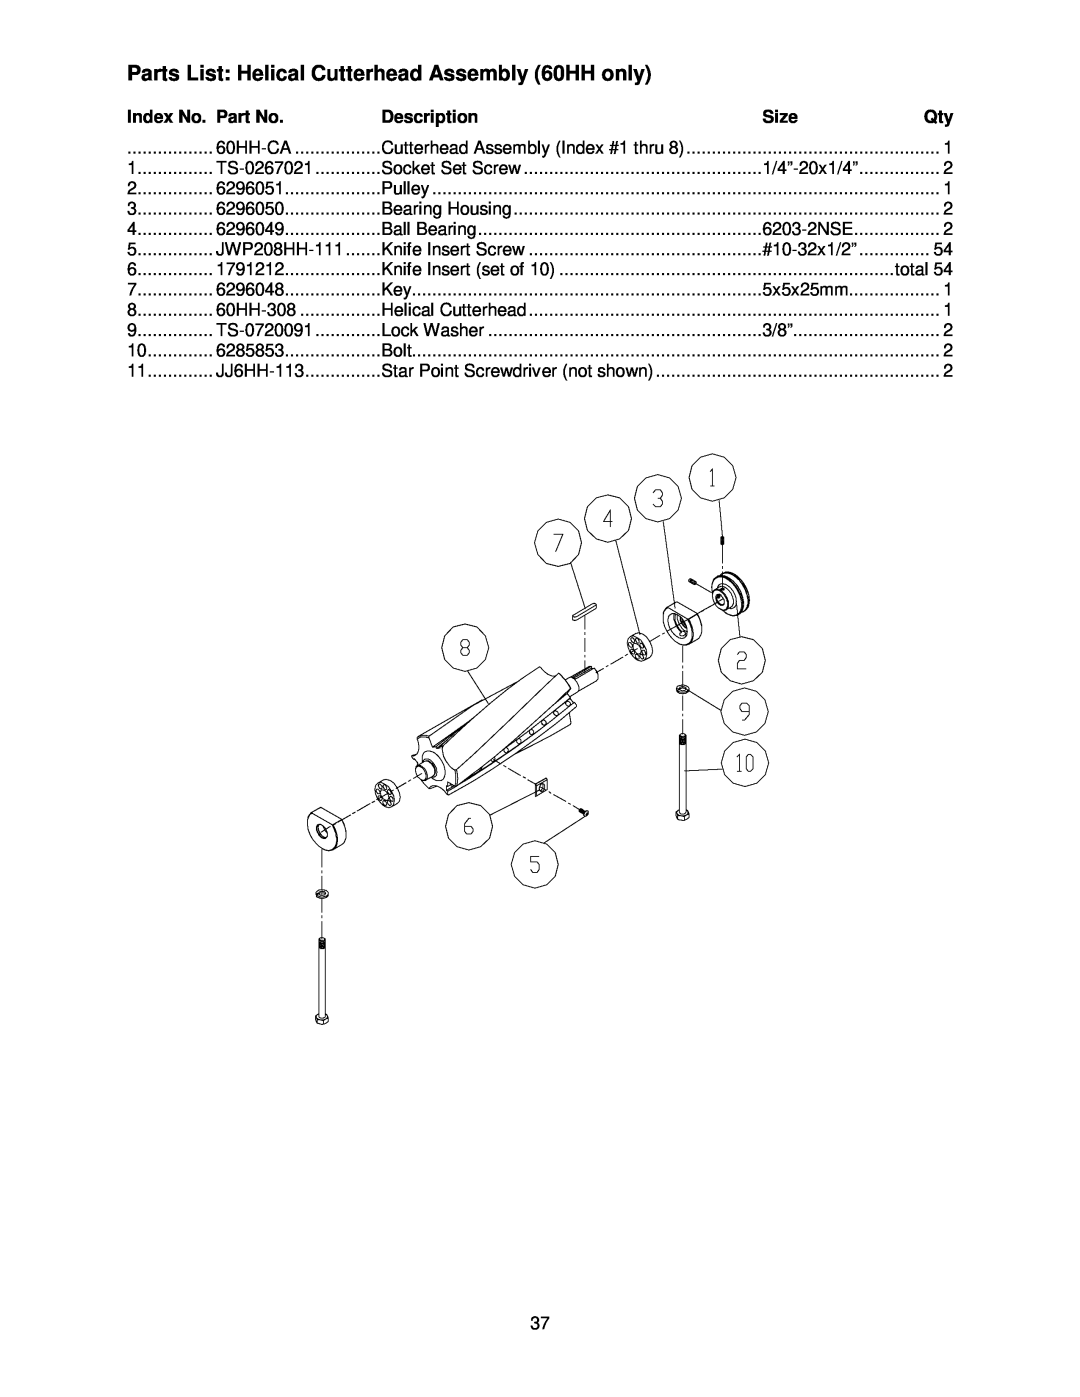 Powermatic 60C Parts List Helical Cutterhead Assembly 60HH only, Index No. Part No, Description, Size, Ball Bearing 